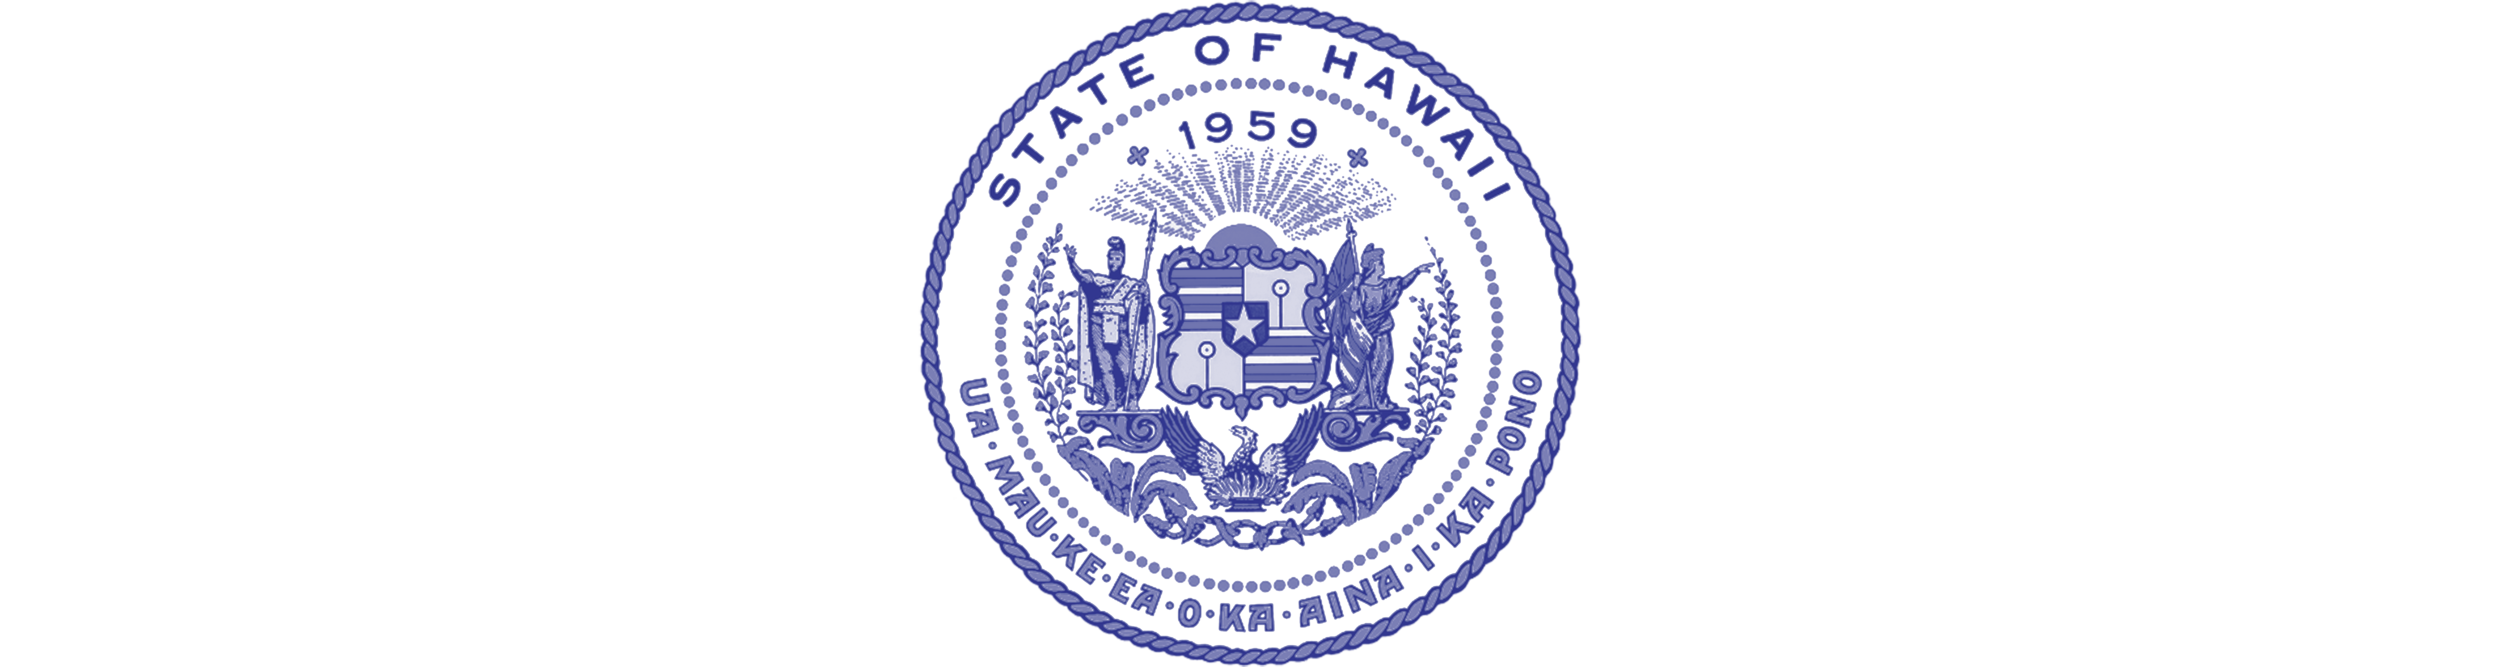 HPHA-resources-logo-State-Hawaii .png